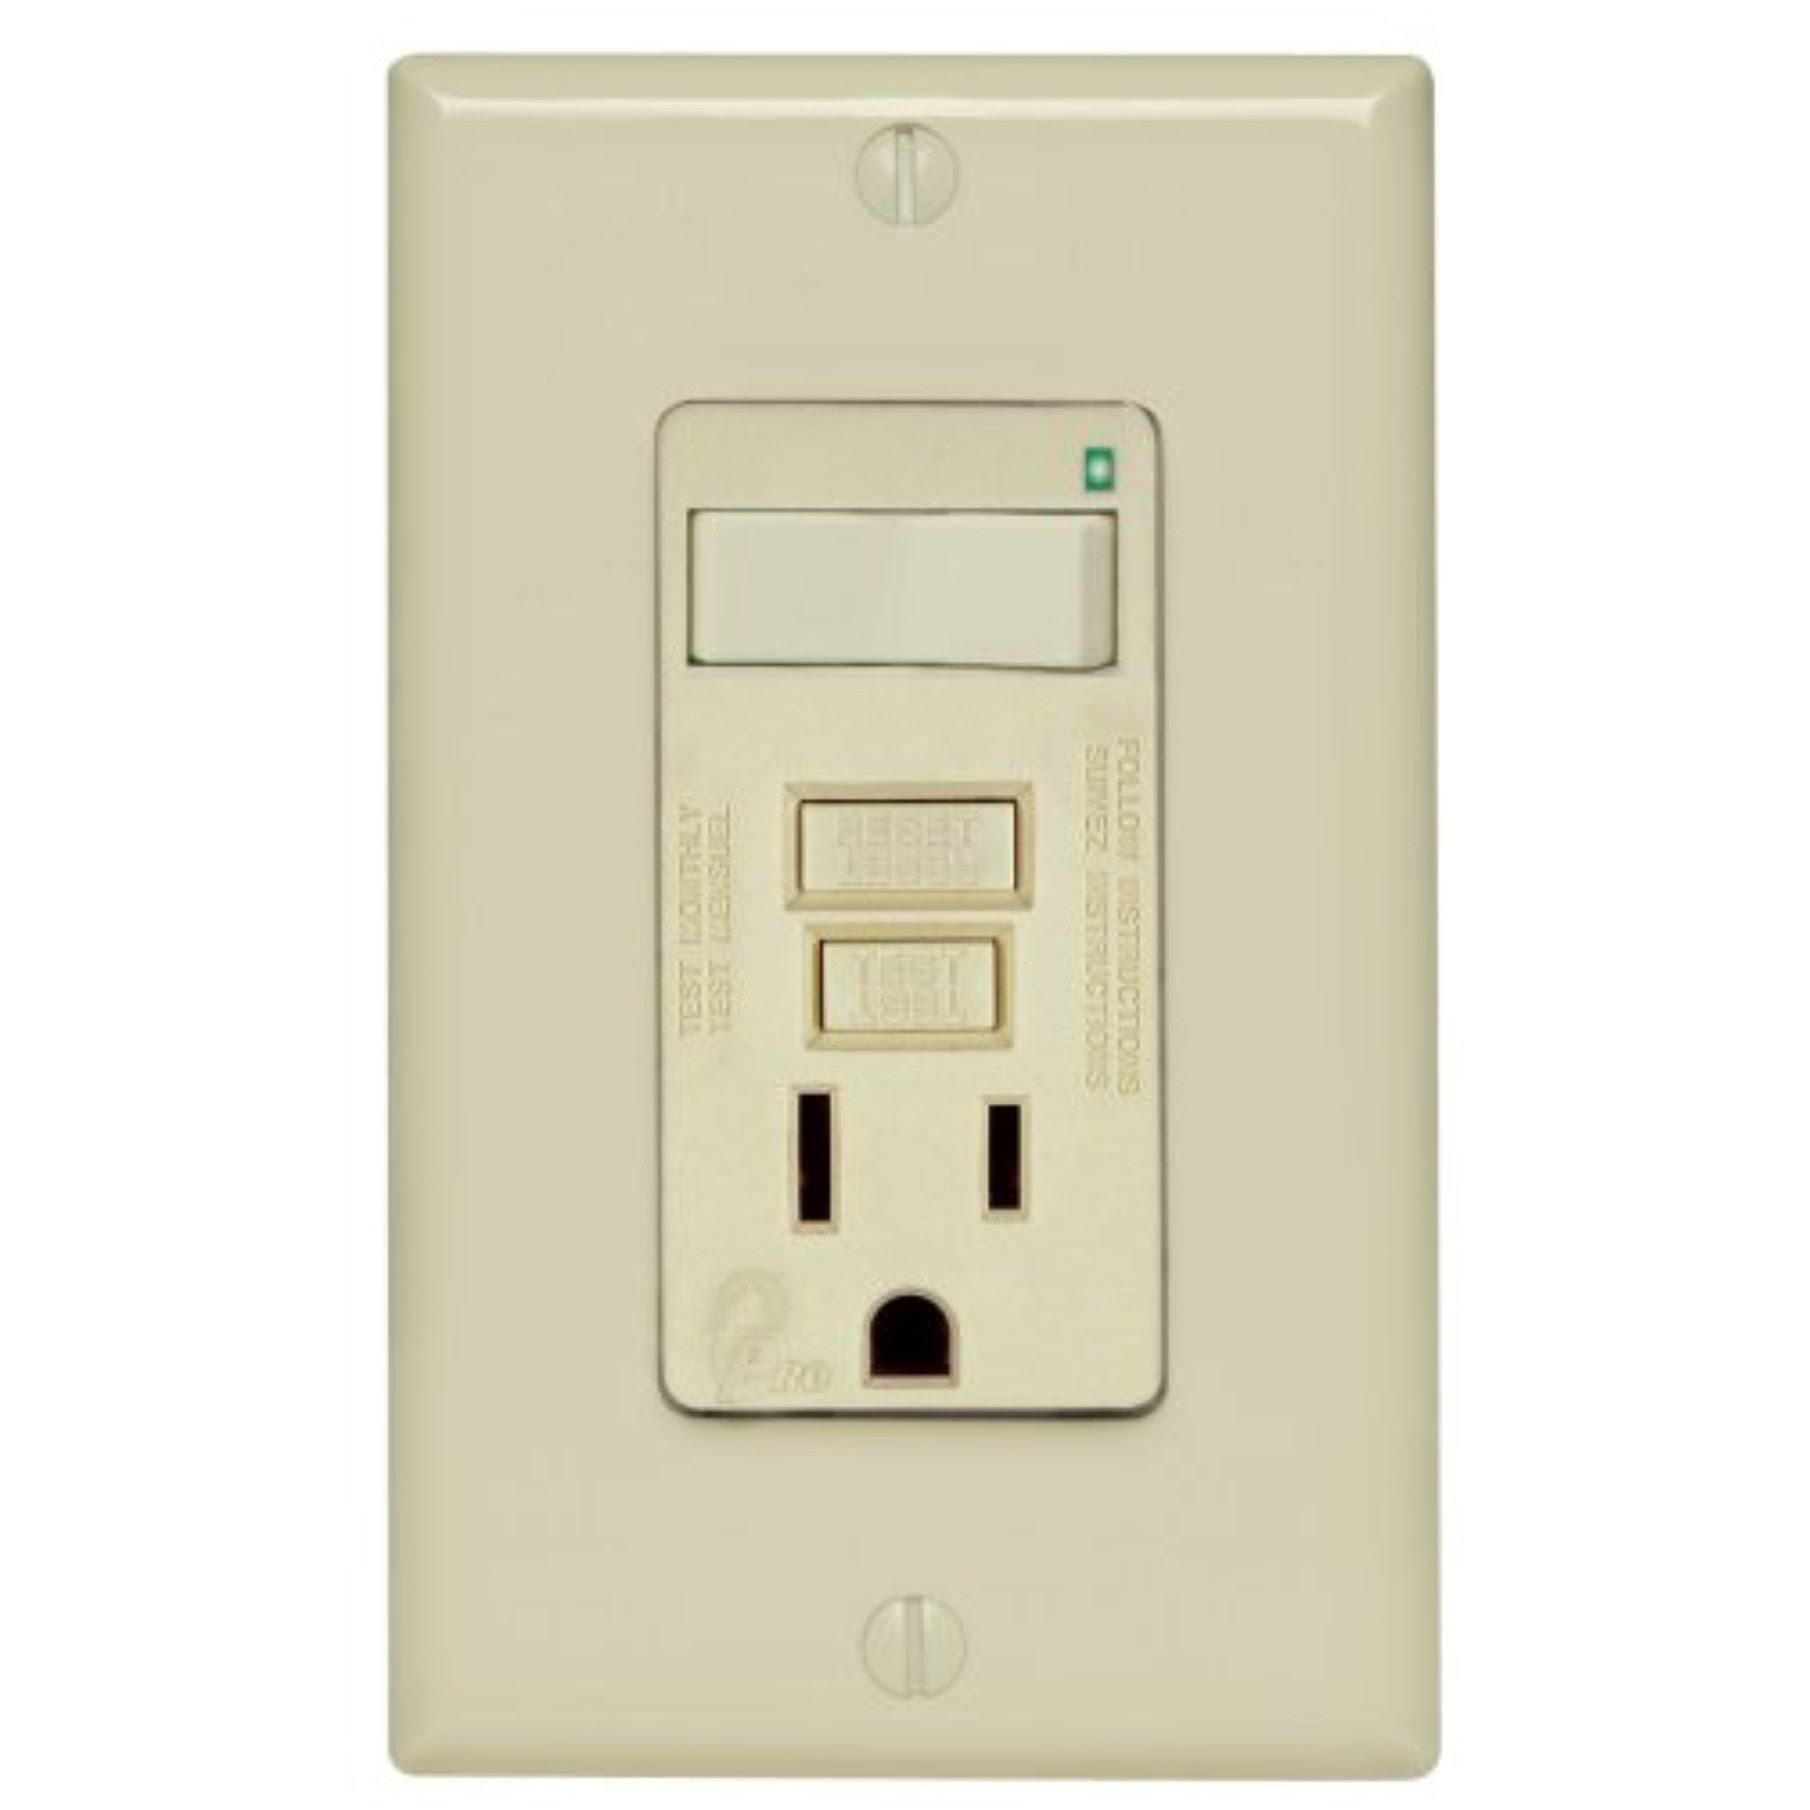 Leviton 606536 Combo Switch-smartlock Pro Outlet - Ivory, 15 Amp